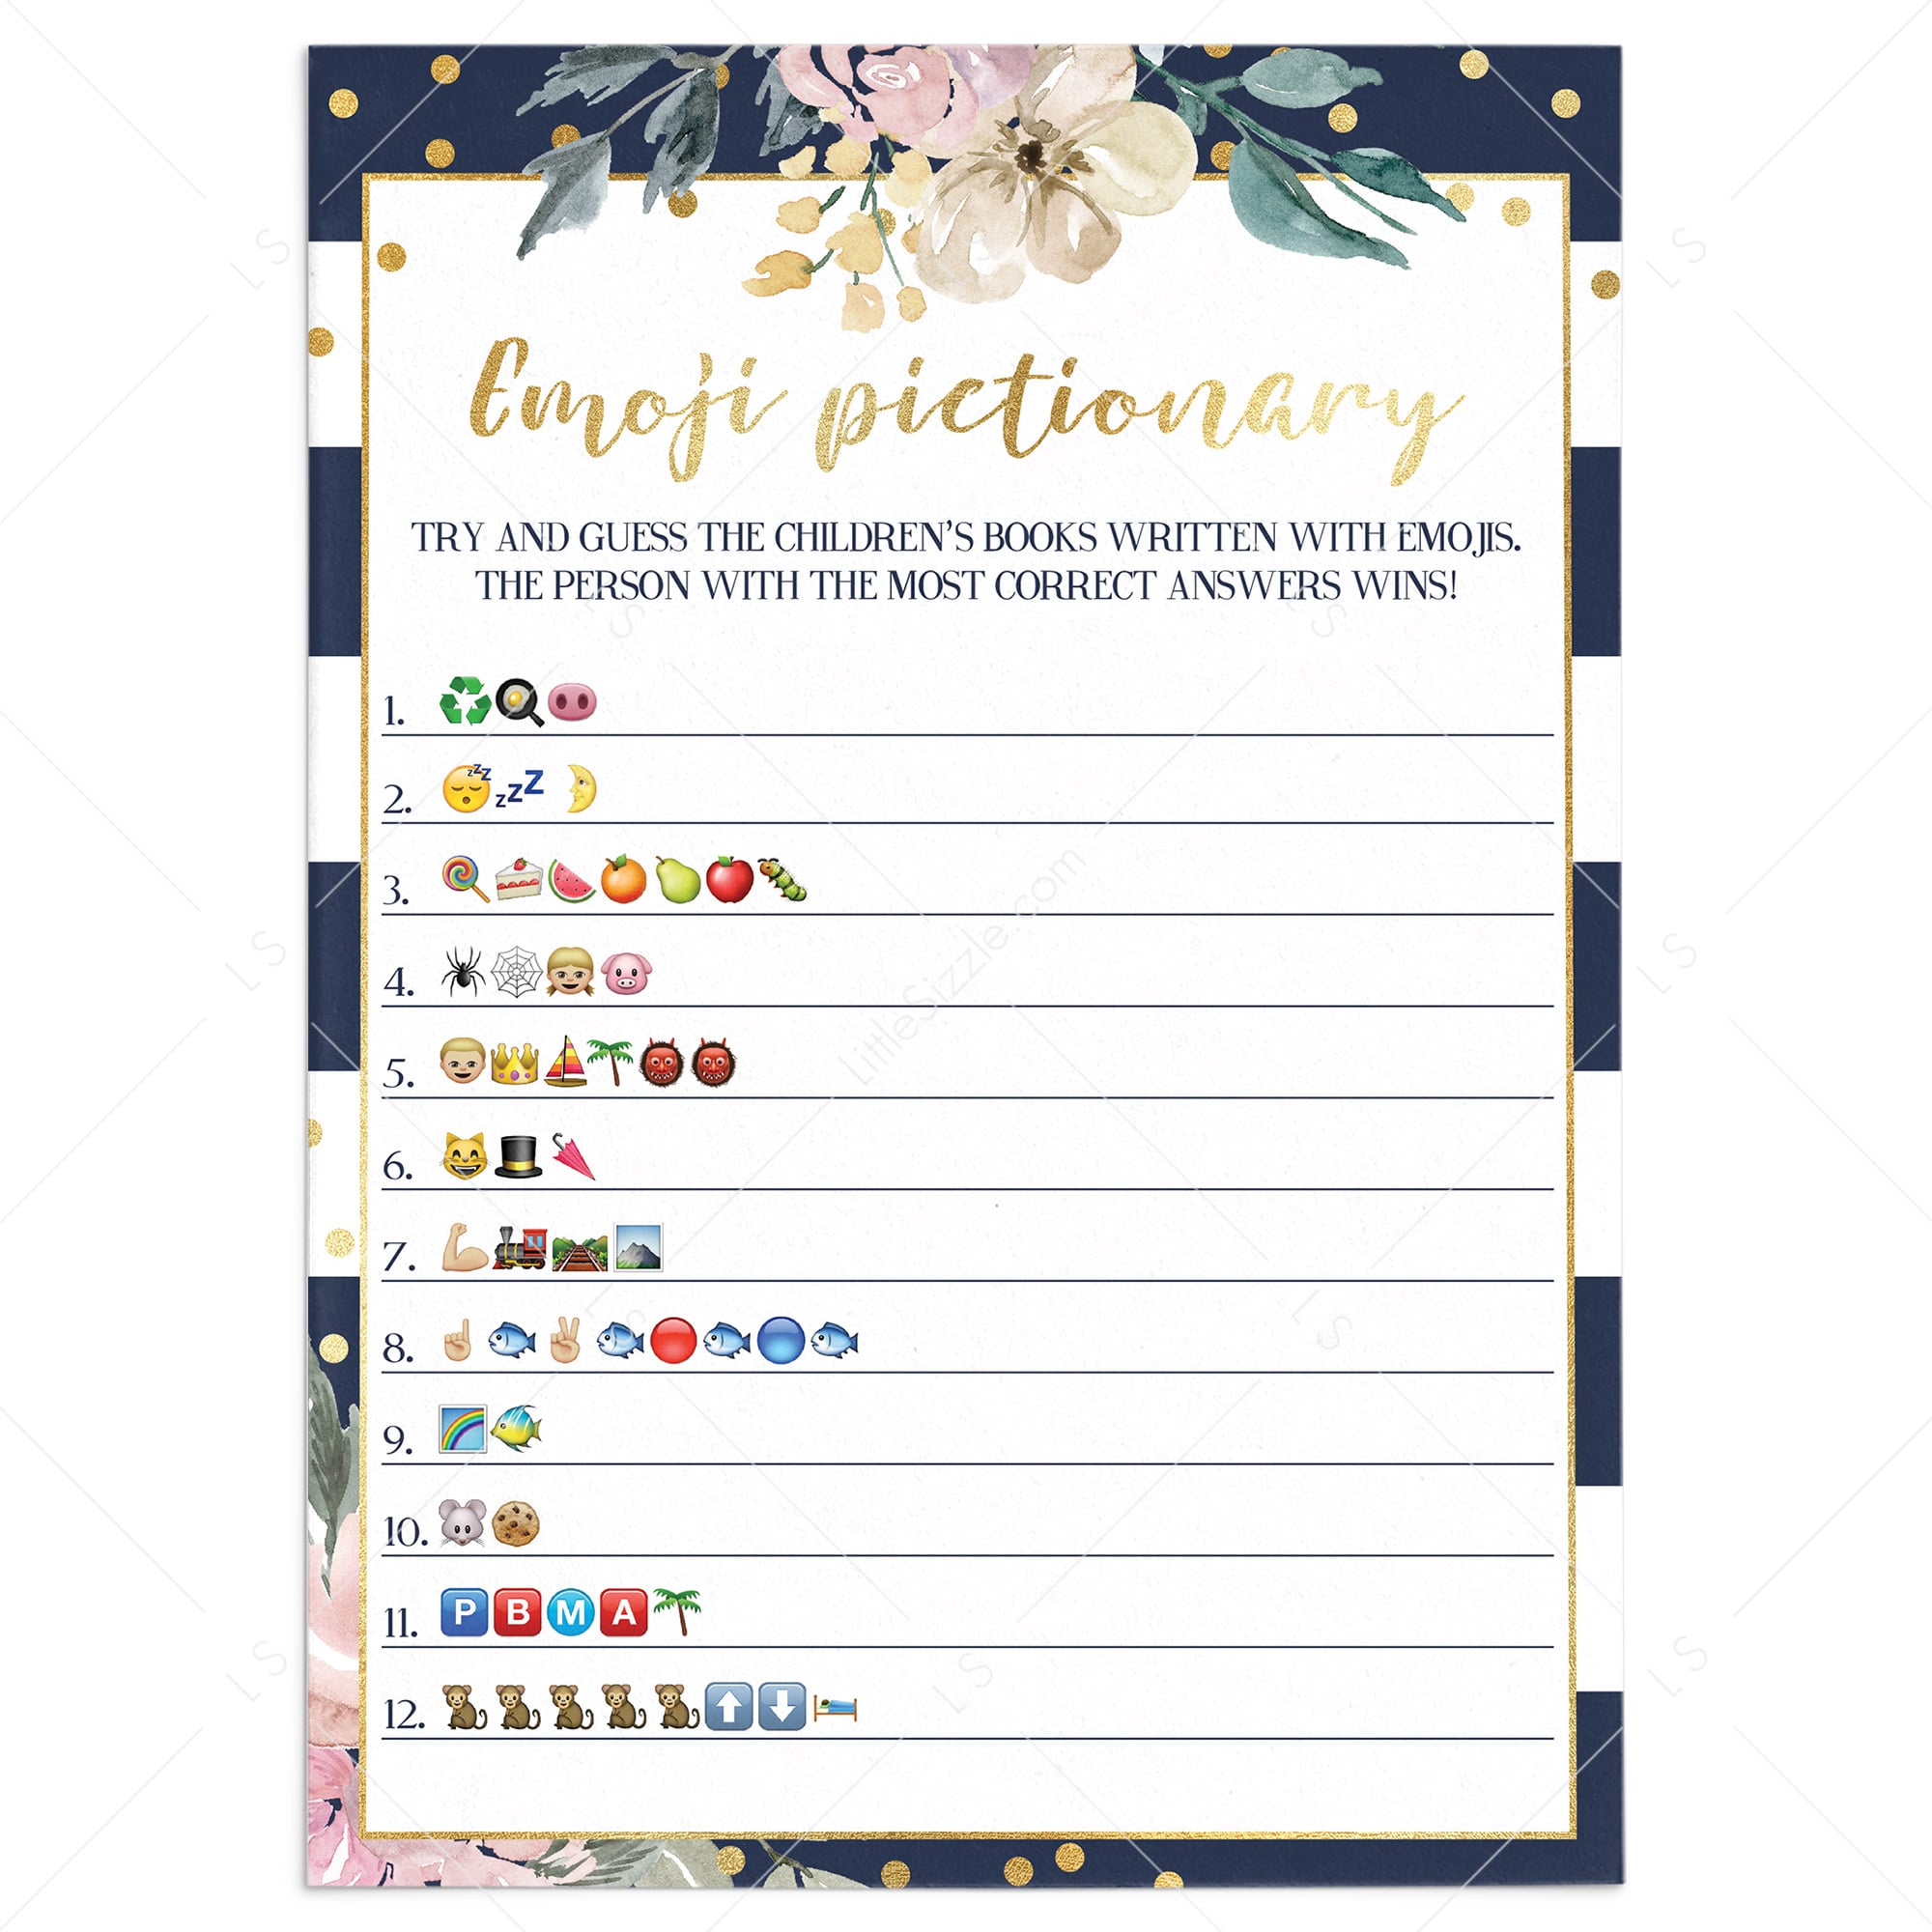 Childrens Books Emoji Pictionary game printable by LittleSizzle